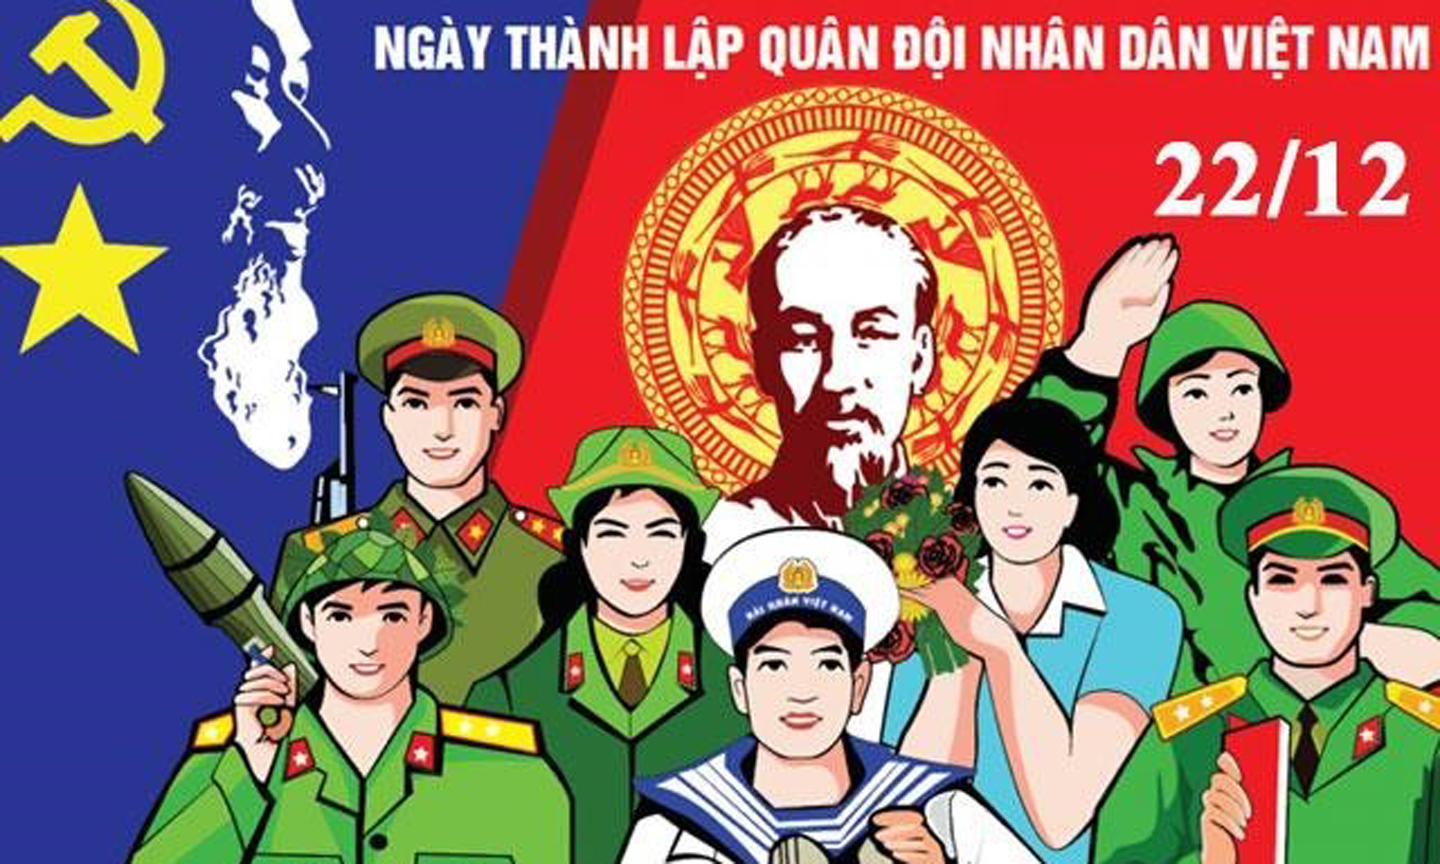  Poster contest on Vietnam People’s Army launched (Photo: melinh.hanoi.gov.vn).